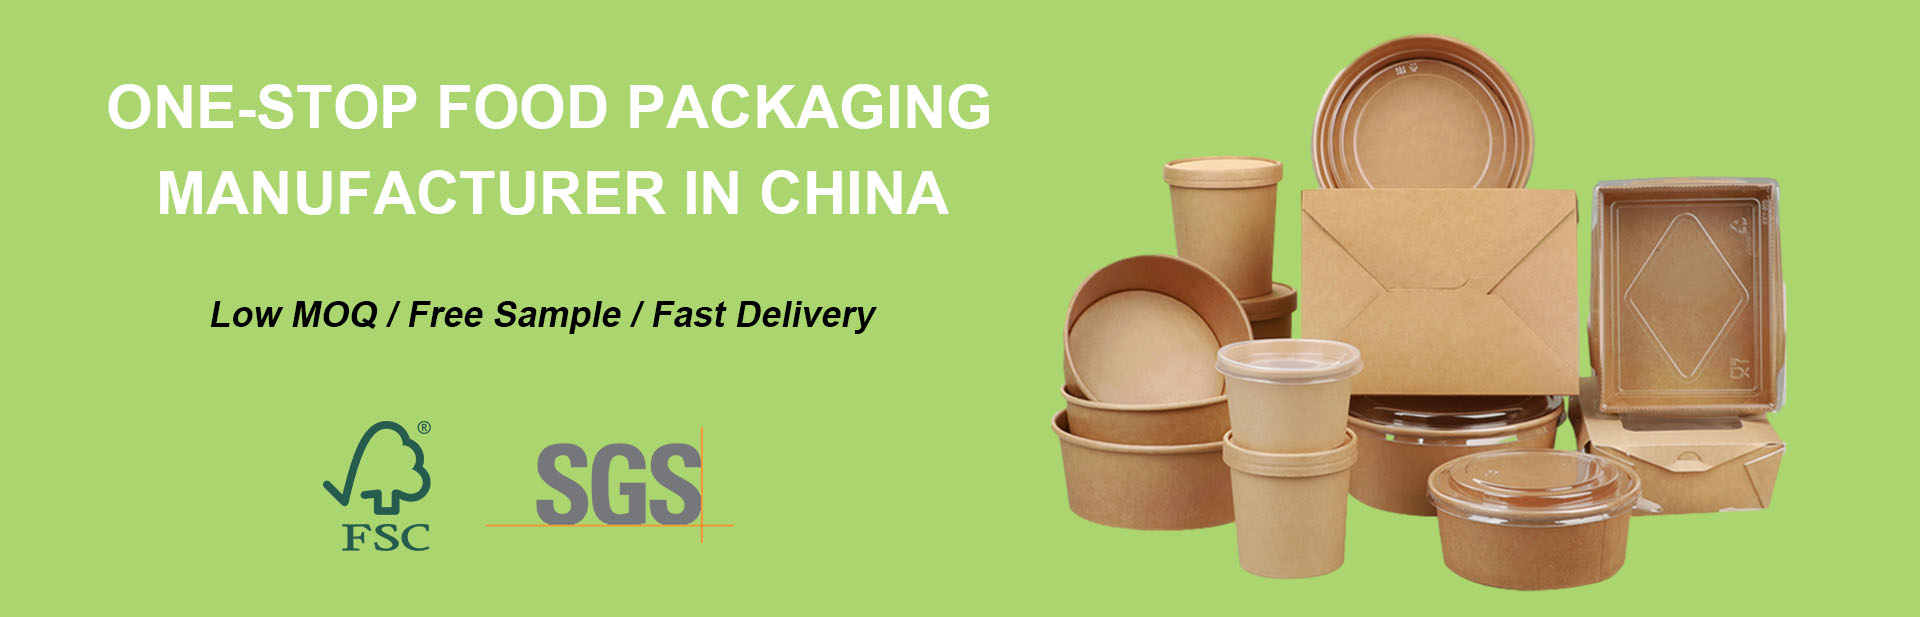 ONE-STOP FOOD PACKAGINGMANUFACTURER IN CHINA